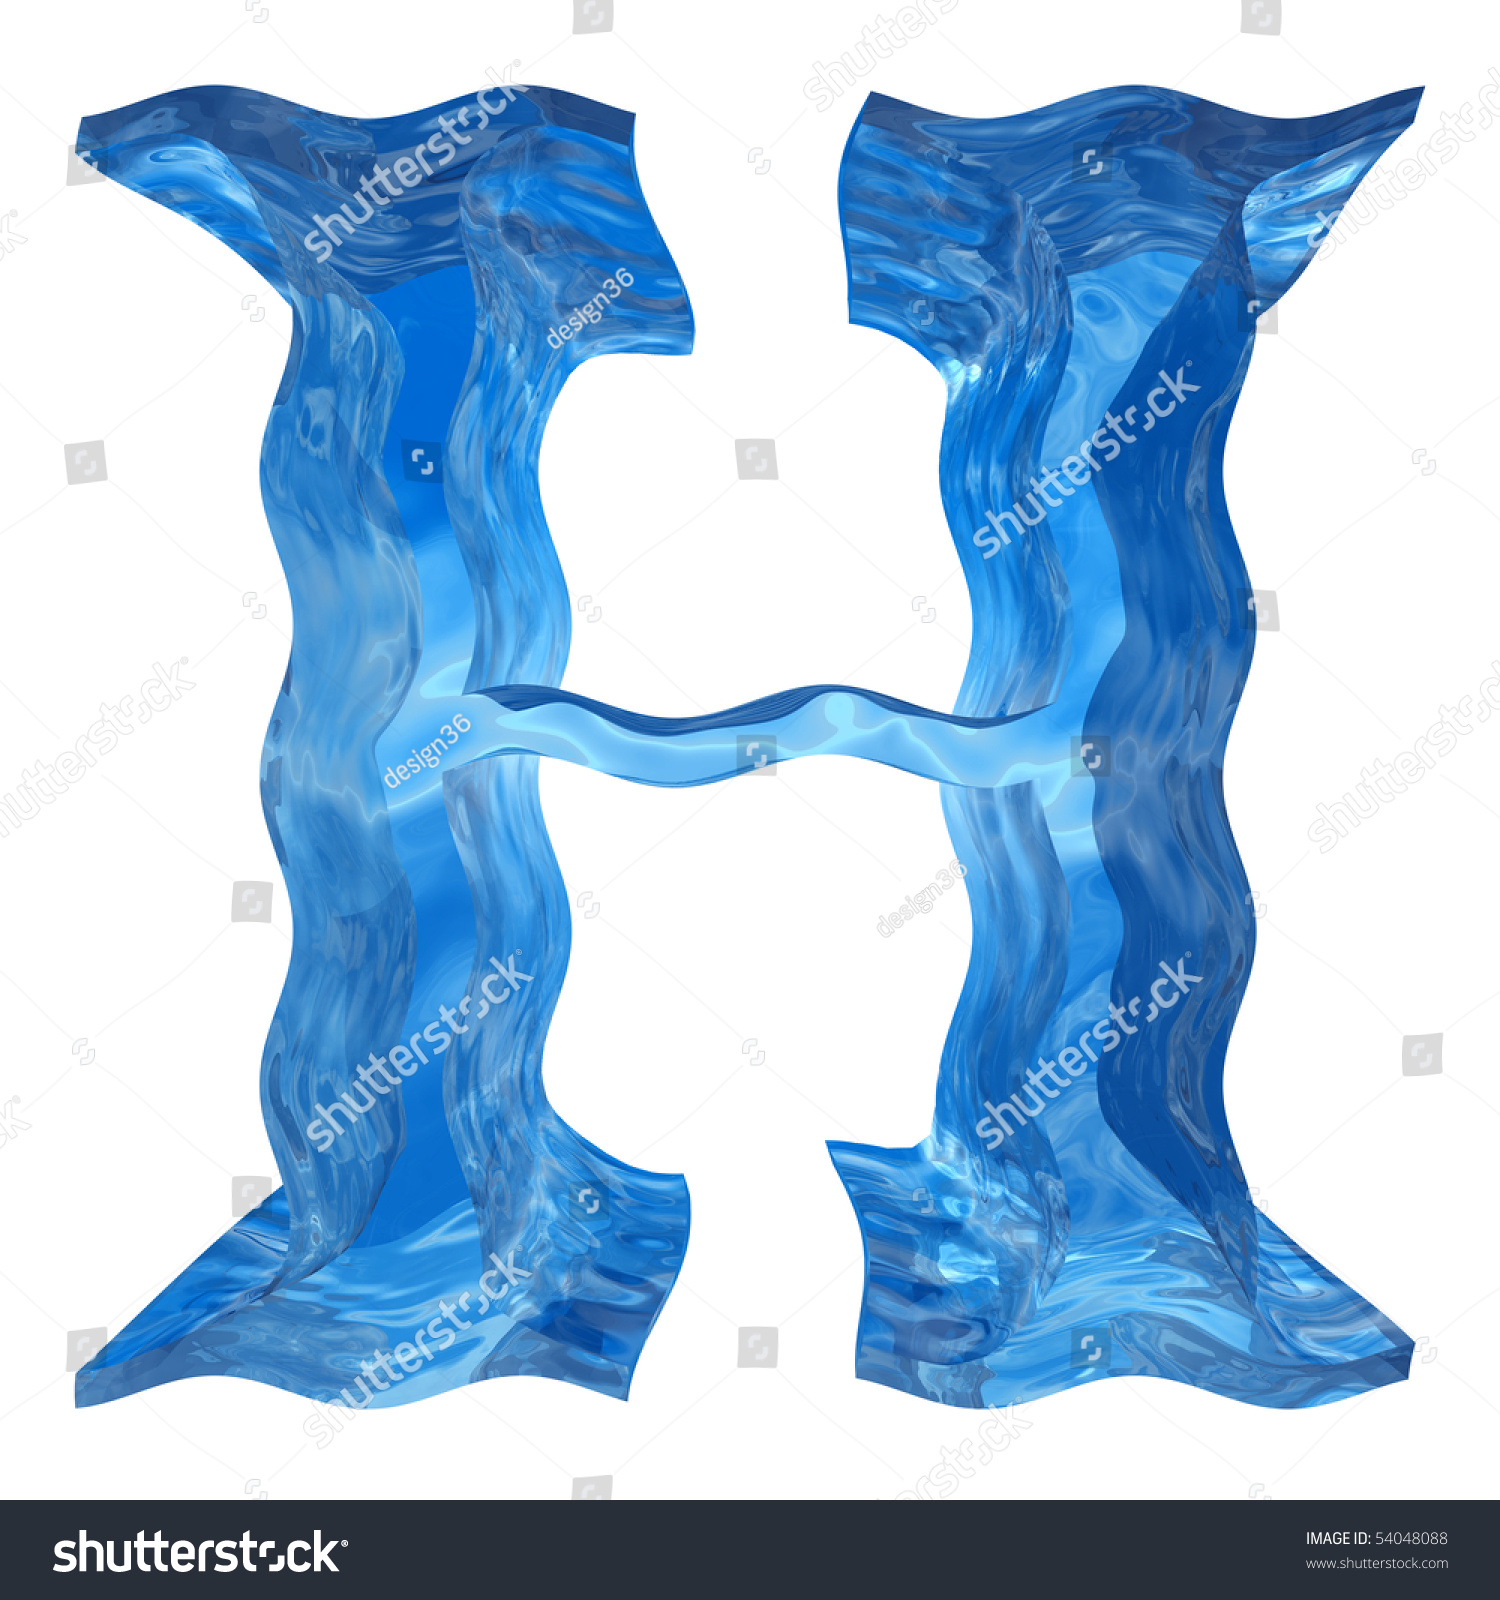 High Resolution Blue Water Font Isolated Stock Illustration 54048088 ...